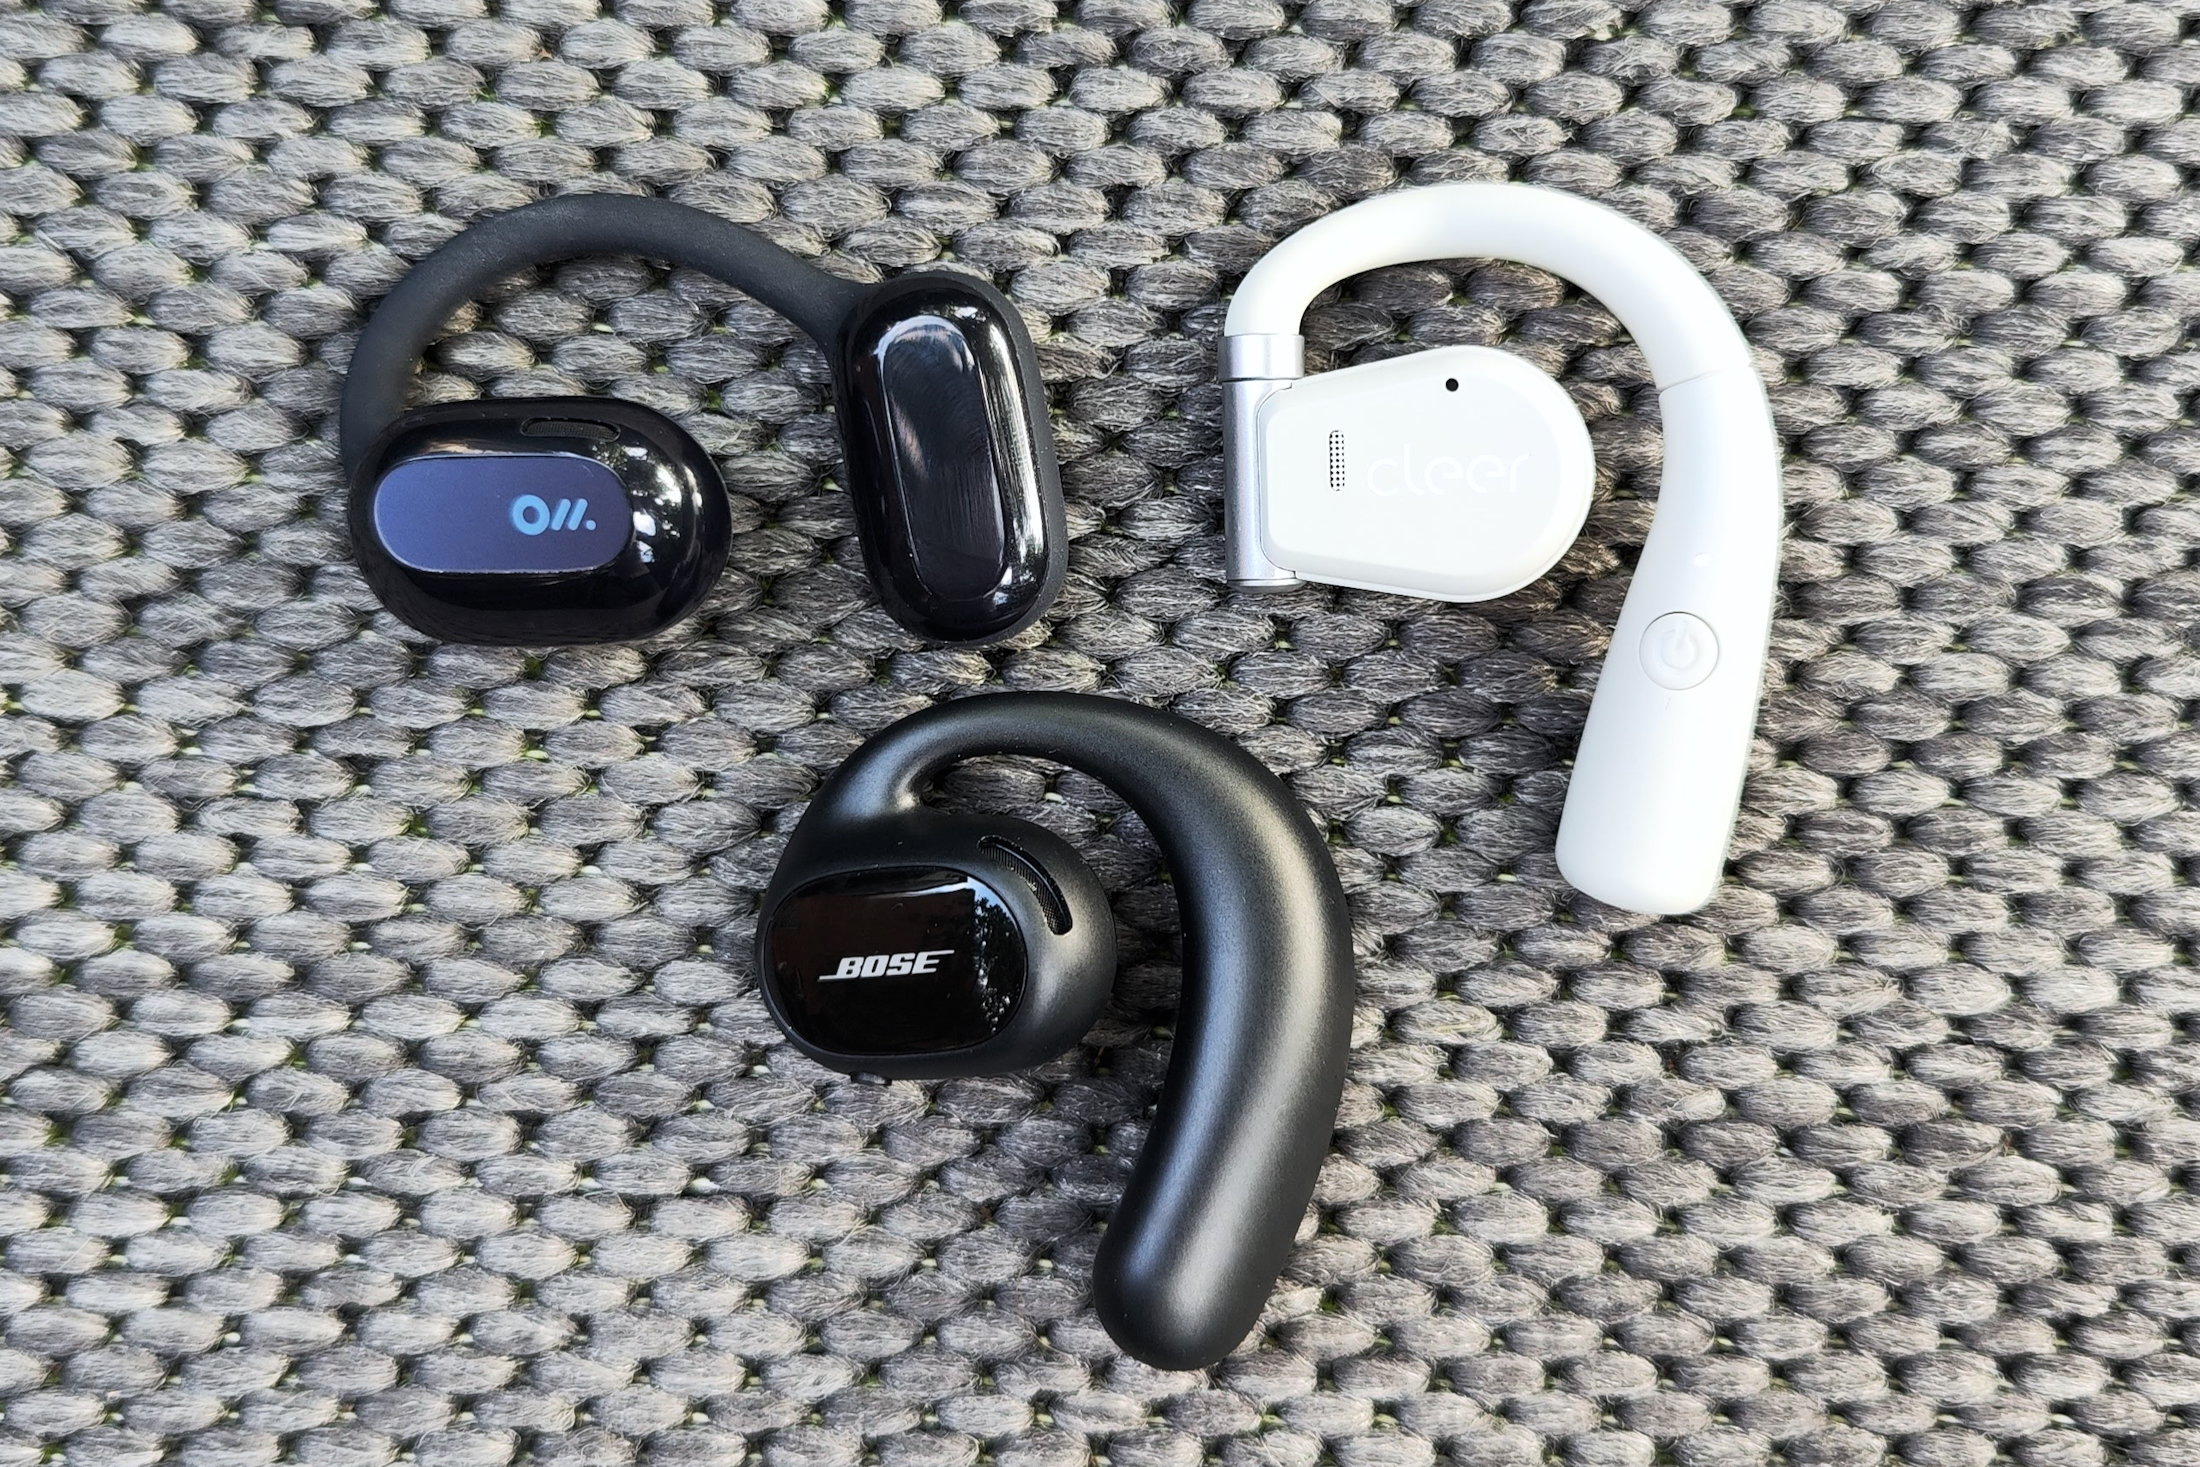 Bose vs. Cleer vs. Oladance: which open earbuds are the best